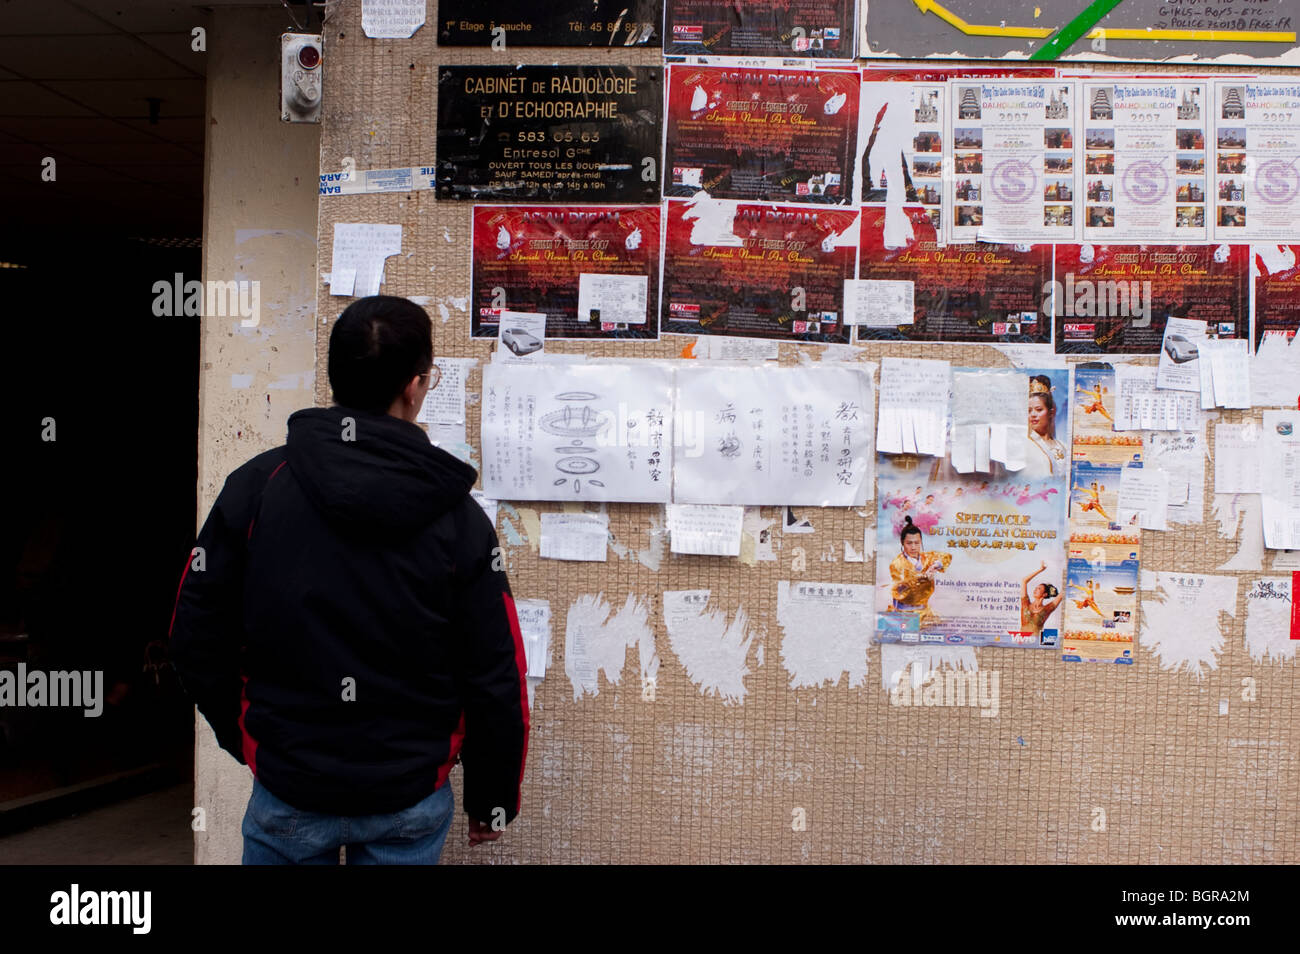 Paris, France, Street Scene, Chinatown, Asian Man Reading Chinese-Language Notices on Wall, outside, paris chinese community Stock Photo